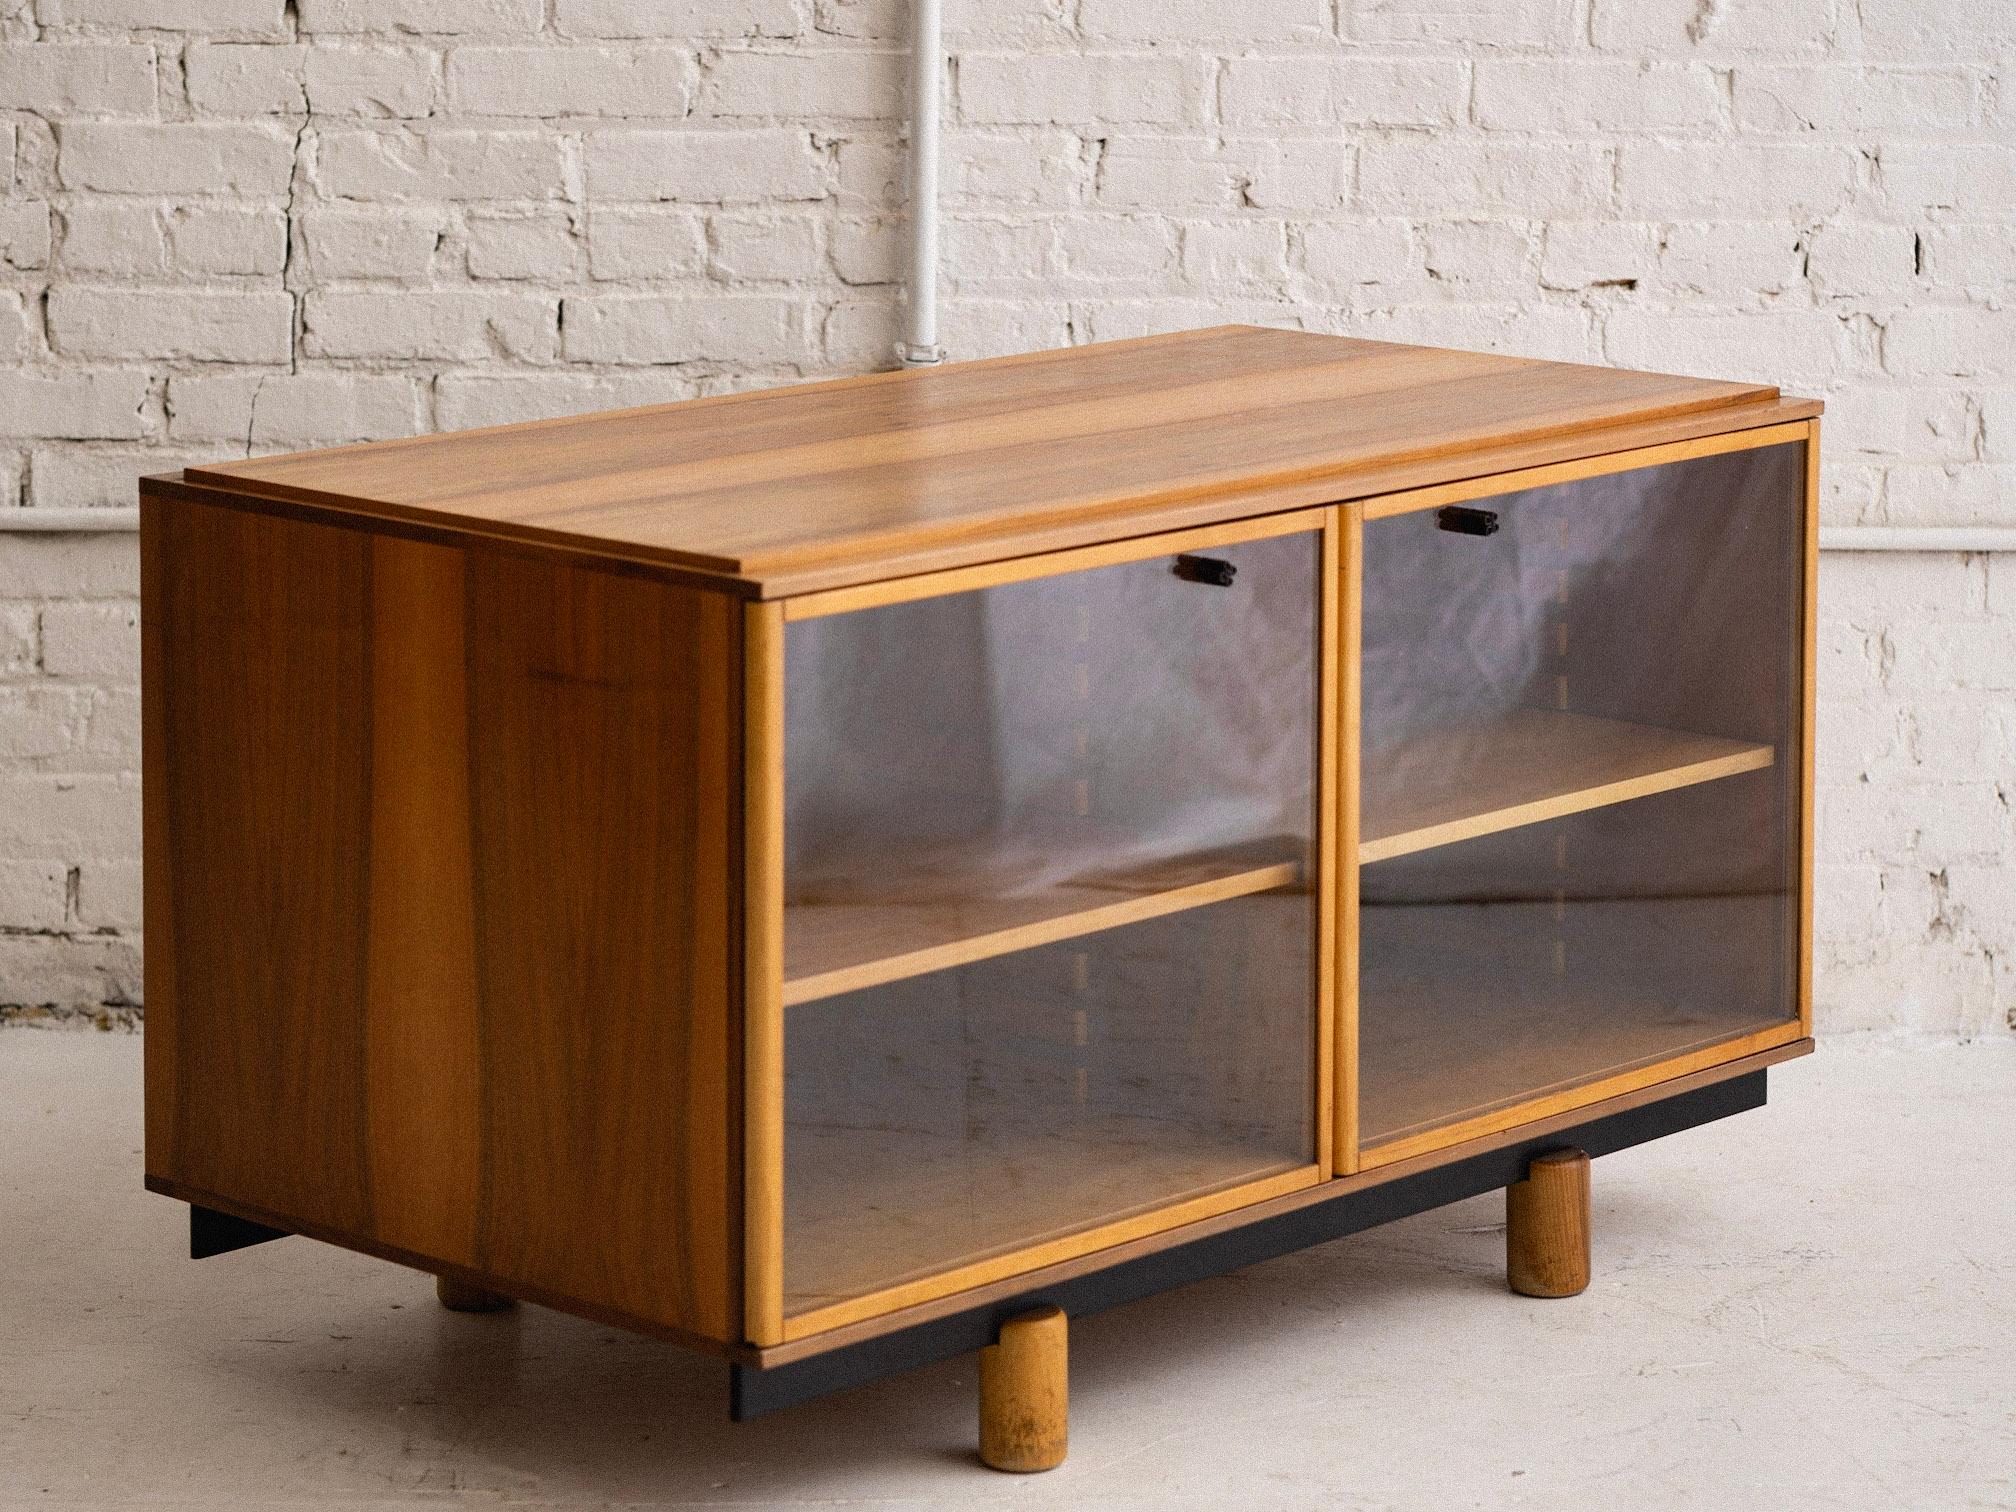 A mid century Italian sideboard cabinet by Gianfranco Frattini for Bernini. Model “806,” this pieces features two glass doors and inner adjustable shelving, blonde wood and black Bernini branded hardware. Designed to be used alone or in tandem with